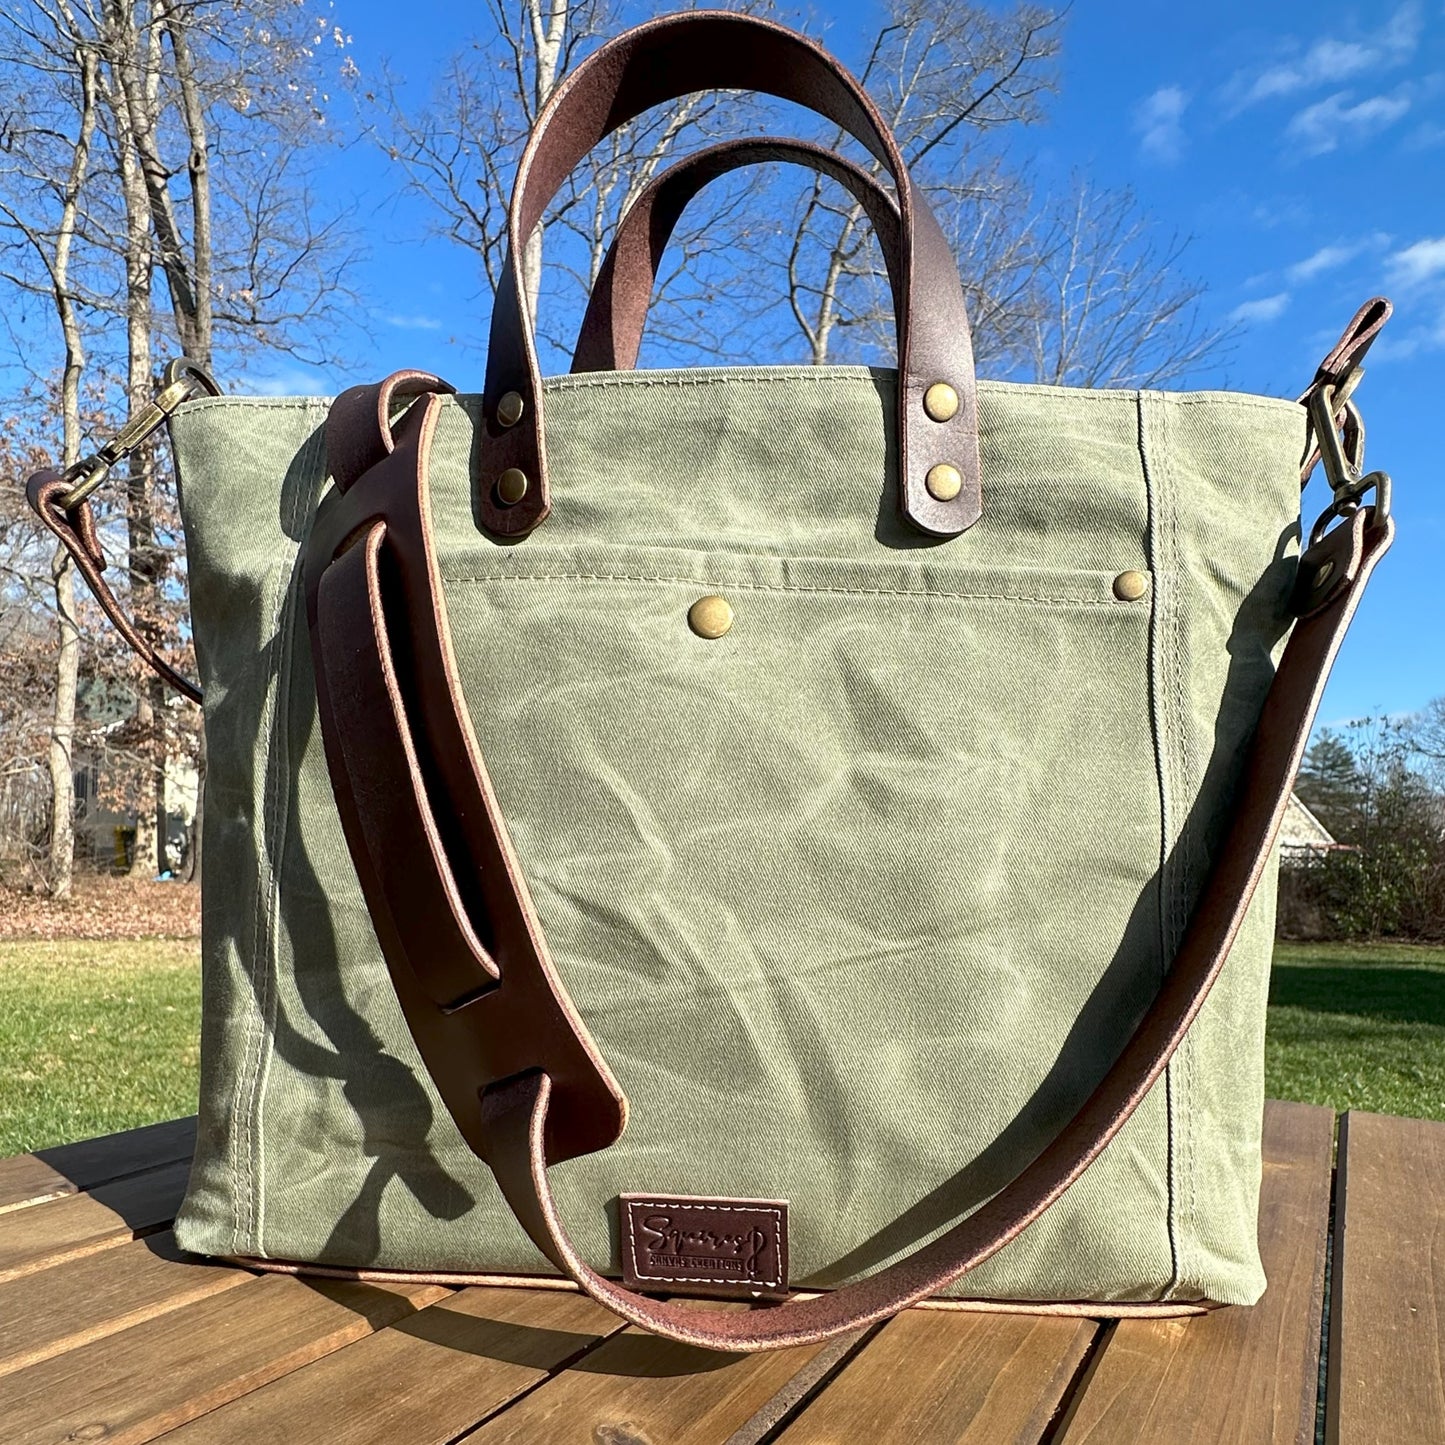 Made to Order: Oxford Tote